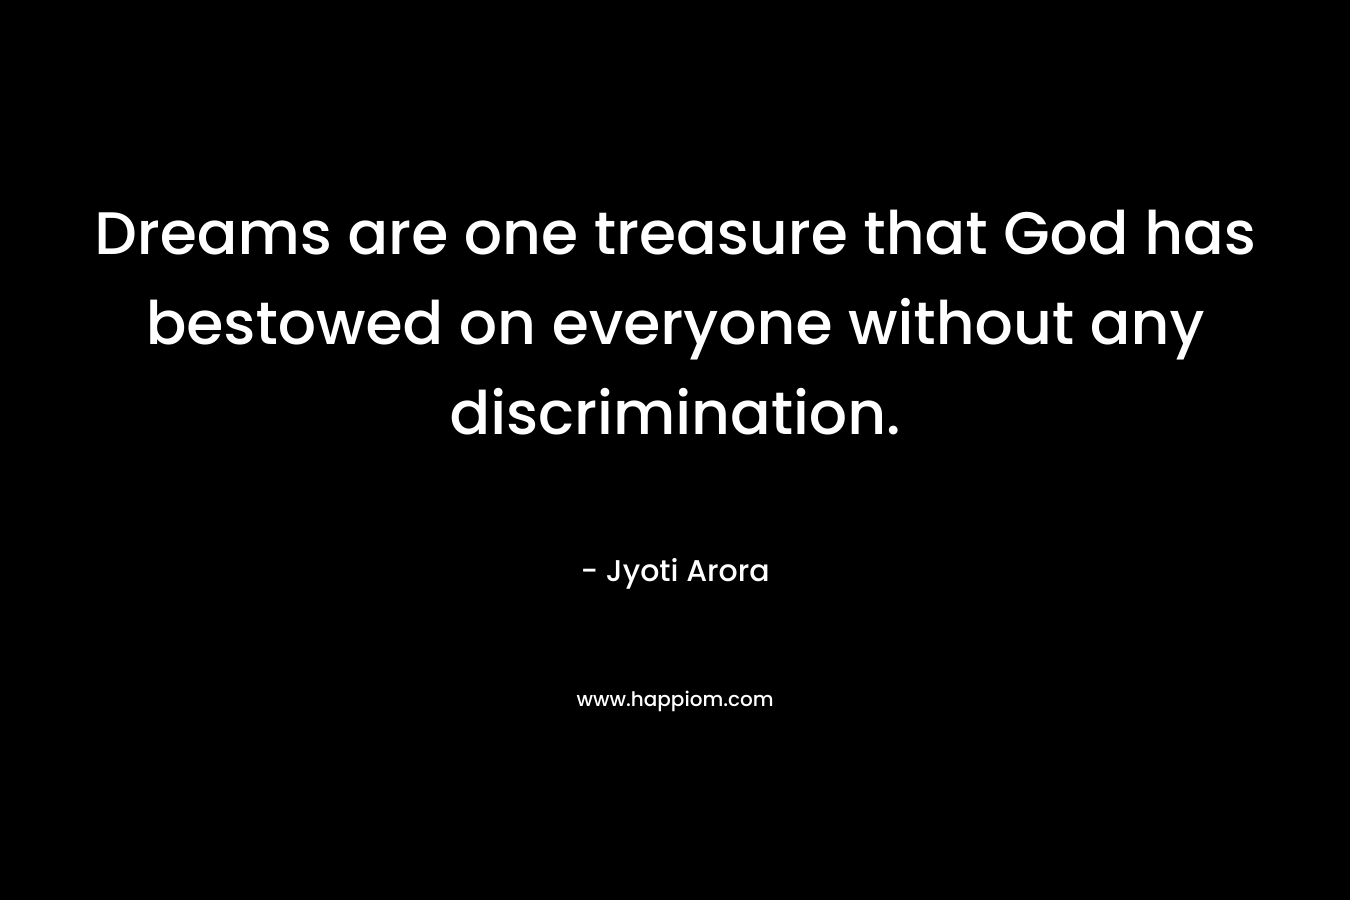 Dreams are one treasure that God has bestowed on everyone without any discrimination. – Jyoti Arora